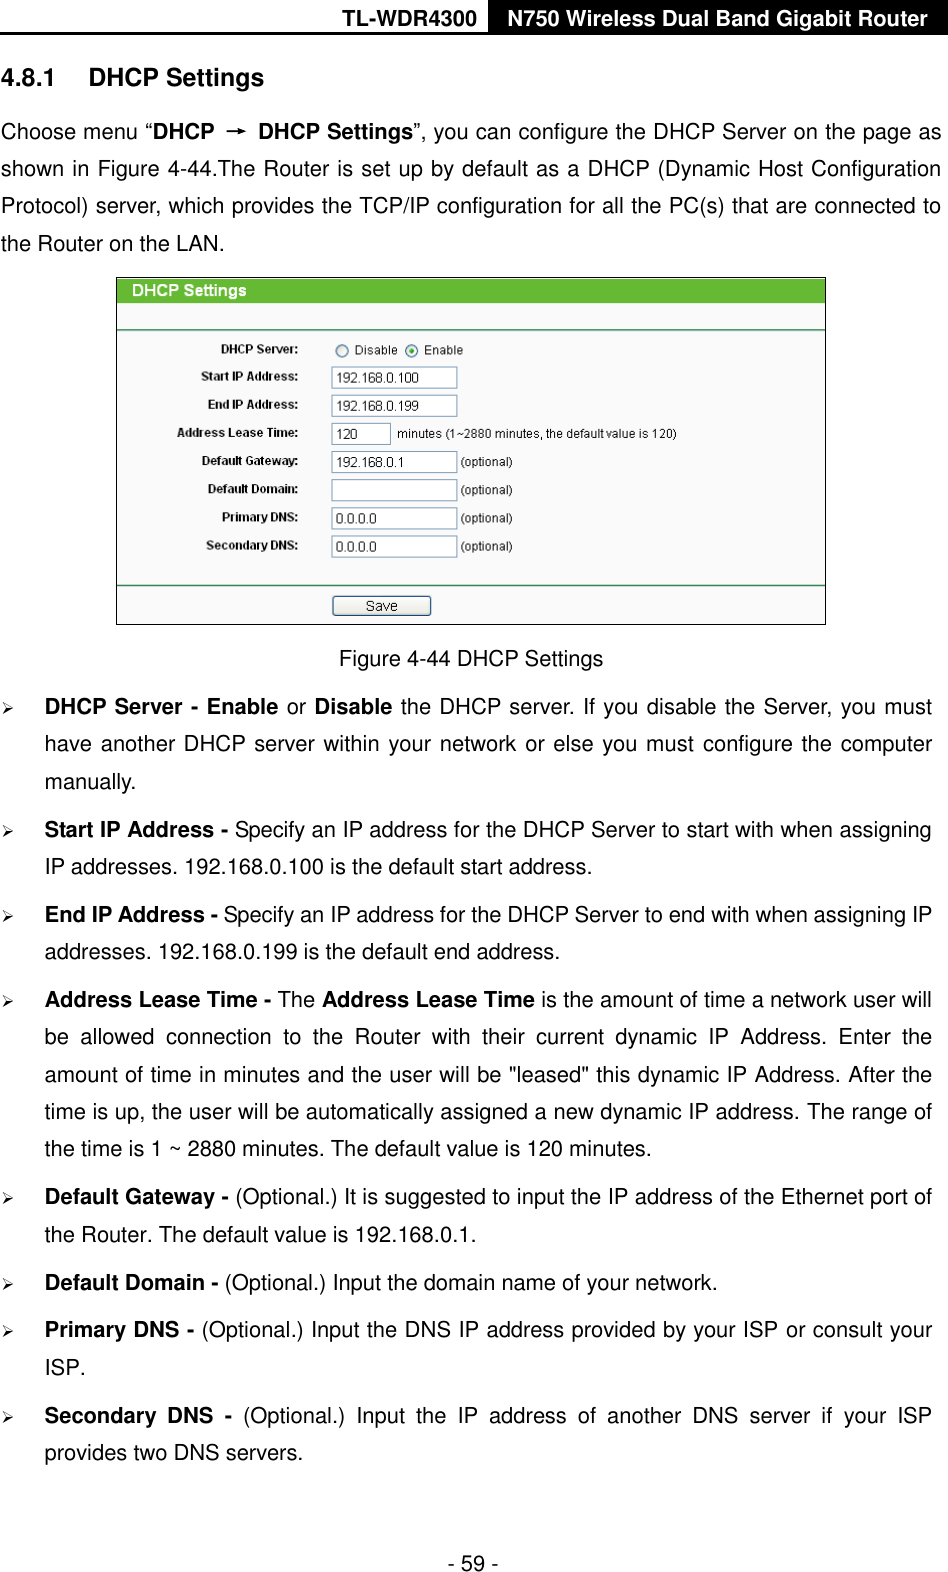 TL-WDR4300 N750 Wireless Dual Band Gigabit Router  - 59 - 4.8.1  DHCP Settings Choose menu “DHCP  →  DHCP Settings”, you can configure the DHCP Server on the page as shown in Figure 4-44.The Router is set up by default as a DHCP (Dynamic Host Configuration Protocol) server, which provides the TCP/IP configuration for all the PC(s) that are connected to the Router on the LAN.    Figure 4-44 DHCP Settings  DHCP Server - Enable or Disable the DHCP server. If you disable the Server, you must have another DHCP server within your network or else you must configure the computer manually.  Start IP Address - Specify an IP address for the DHCP Server to start with when assigning IP addresses. 192.168.0.100 is the default start address.  End IP Address - Specify an IP address for the DHCP Server to end with when assigning IP addresses. 192.168.0.199 is the default end address.  Address Lease Time - The Address Lease Time is the amount of time a network user will be  allowed  connection  to  the  Router  with  their  current  dynamic  IP  Address.  Enter  the amount of time in minutes and the user will be &quot;leased&quot; this dynamic IP Address. After the time is up, the user will be automatically assigned a new dynamic IP address. The range of the time is 1 ~ 2880 minutes. The default value is 120 minutes.  Default Gateway - (Optional.) It is suggested to input the IP address of the Ethernet port of the Router. The default value is 192.168.0.1.  Default Domain - (Optional.) Input the domain name of your network.  Primary DNS - (Optional.) Input the DNS IP address provided by your ISP or consult your ISP.  Secondary  DNS  -  (Optional.)  Input  the  IP  address  of  another  DNS  server  if  your  ISP provides two DNS servers. 